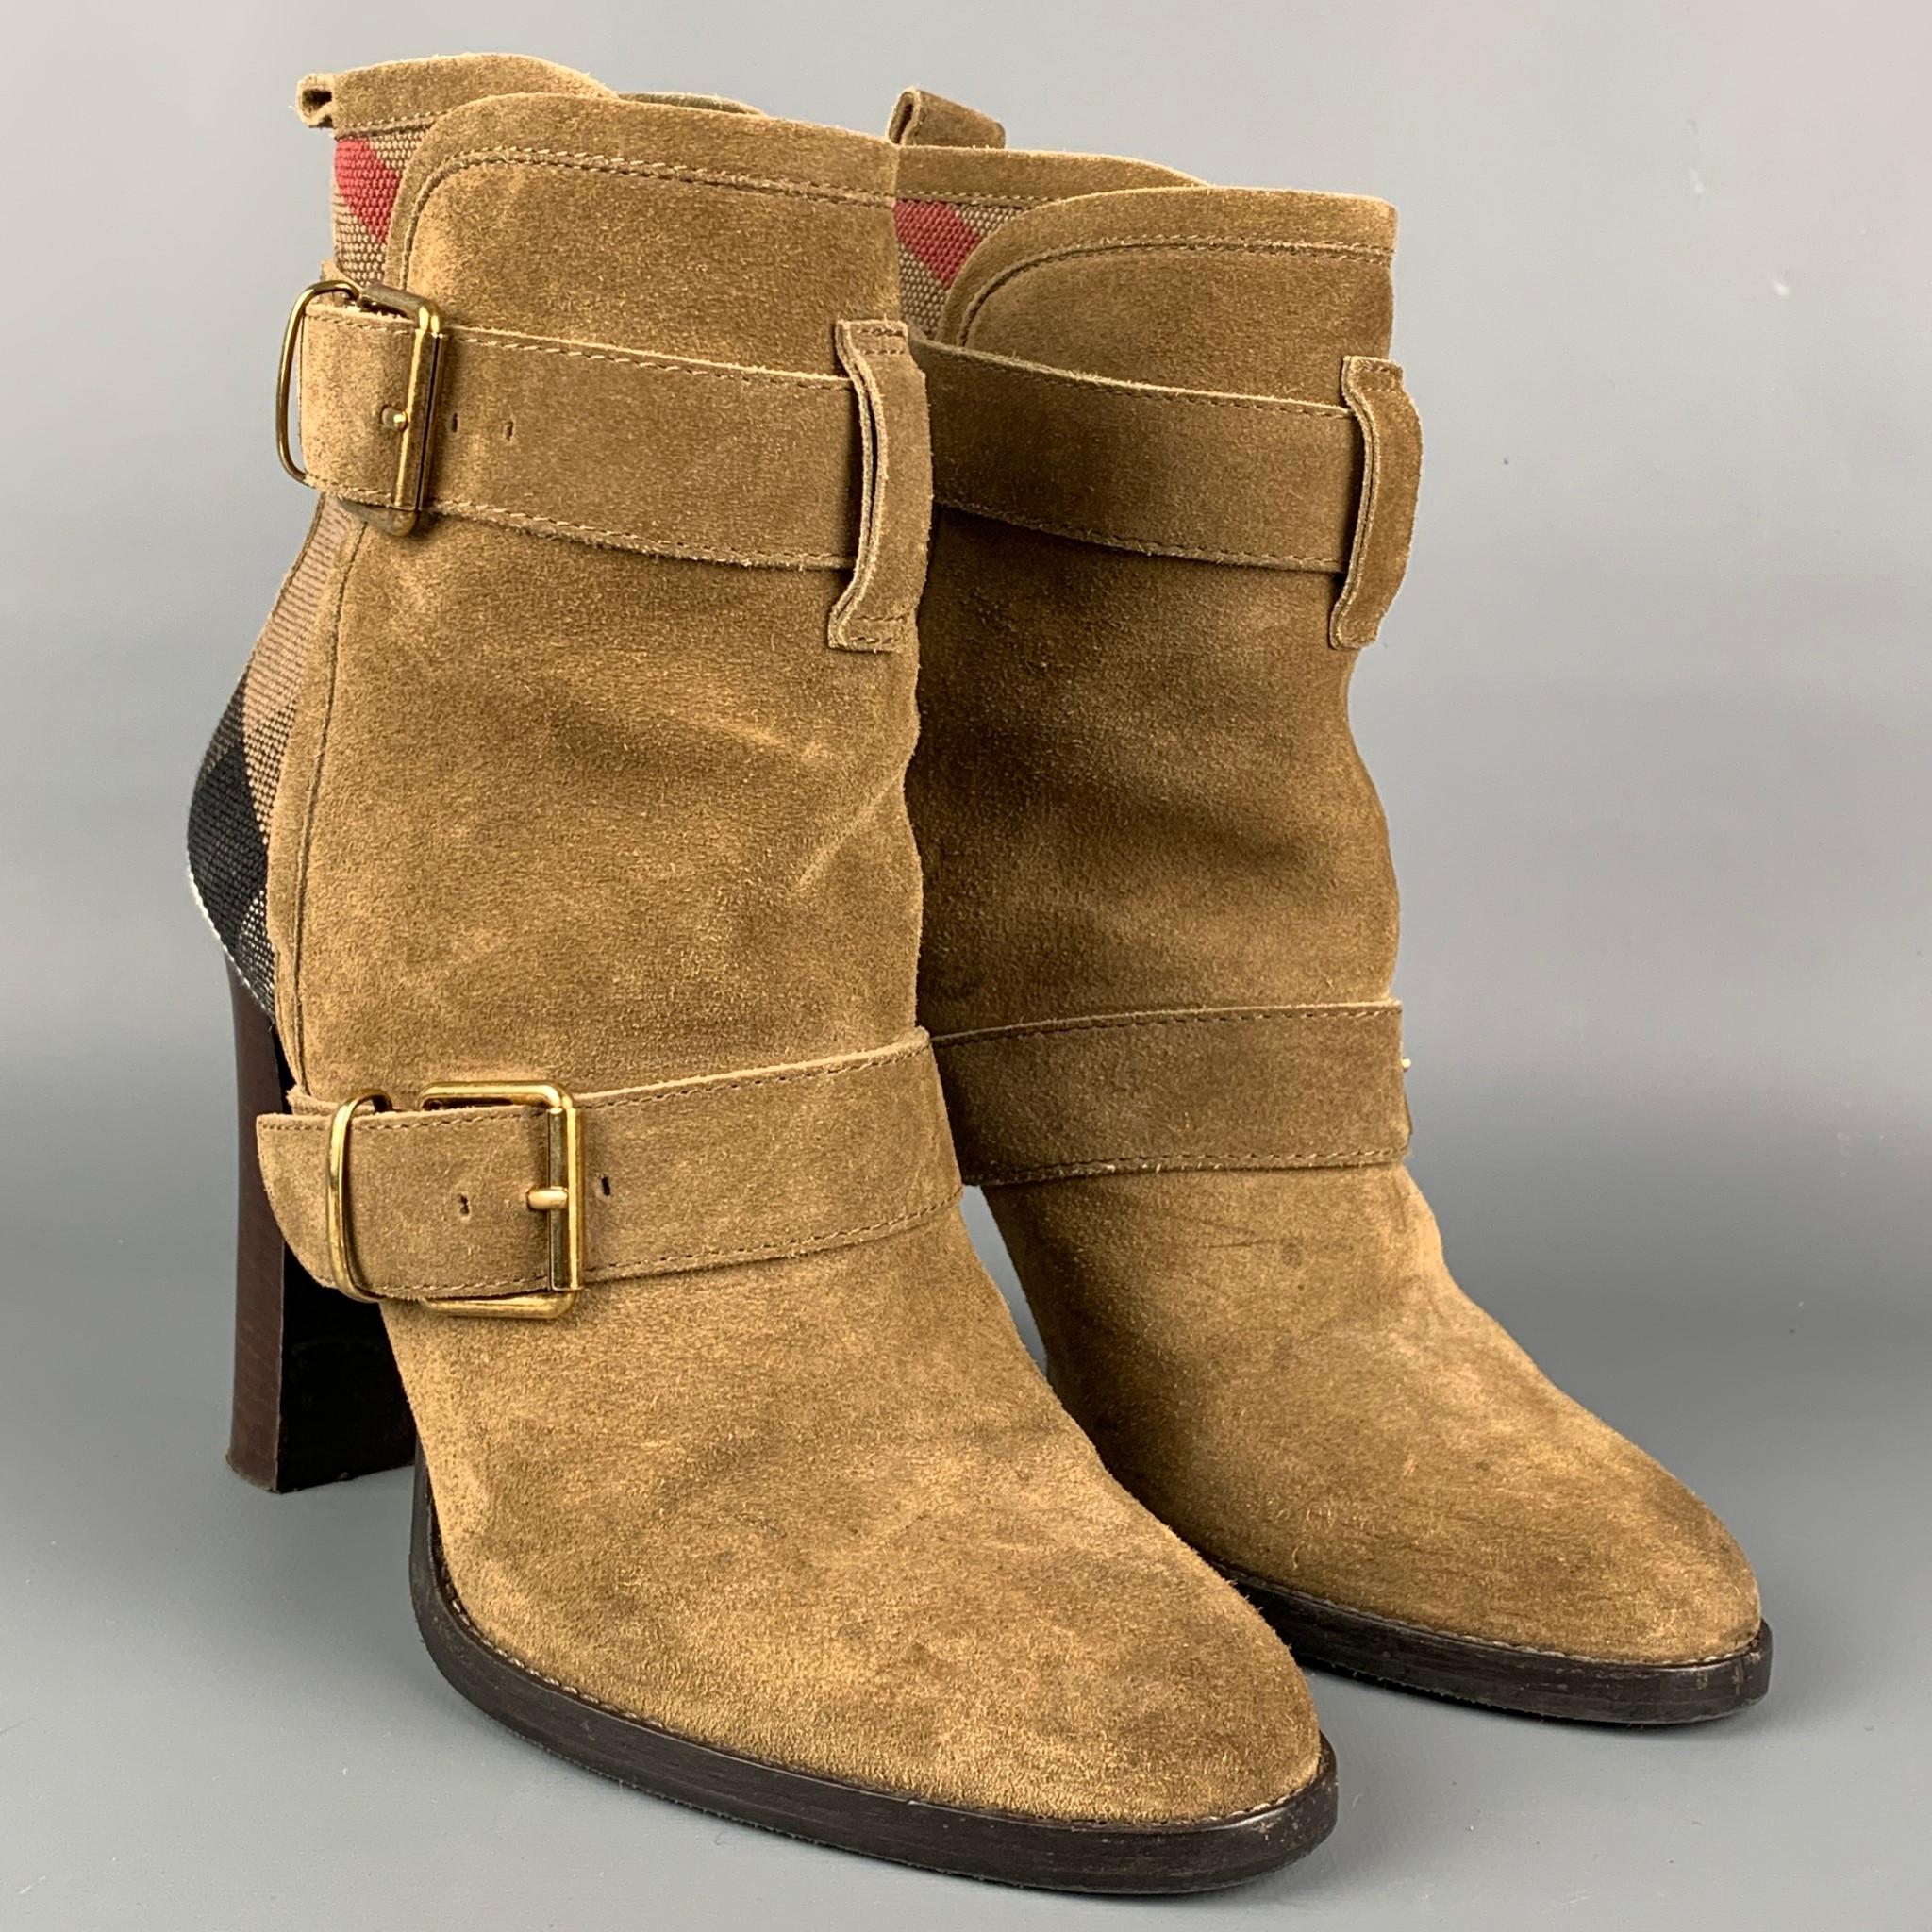 BURBERRY boots comes in a khaki suede with a plaid trim featuring a double strap buckle closure and a chunky heel. 

Good Pre-Owned Condition.
Marked: 38

Measurements:

Length: 8.5 in.
Width: 3.5 in.
Height: 5 in.
Heel: 4 in. 